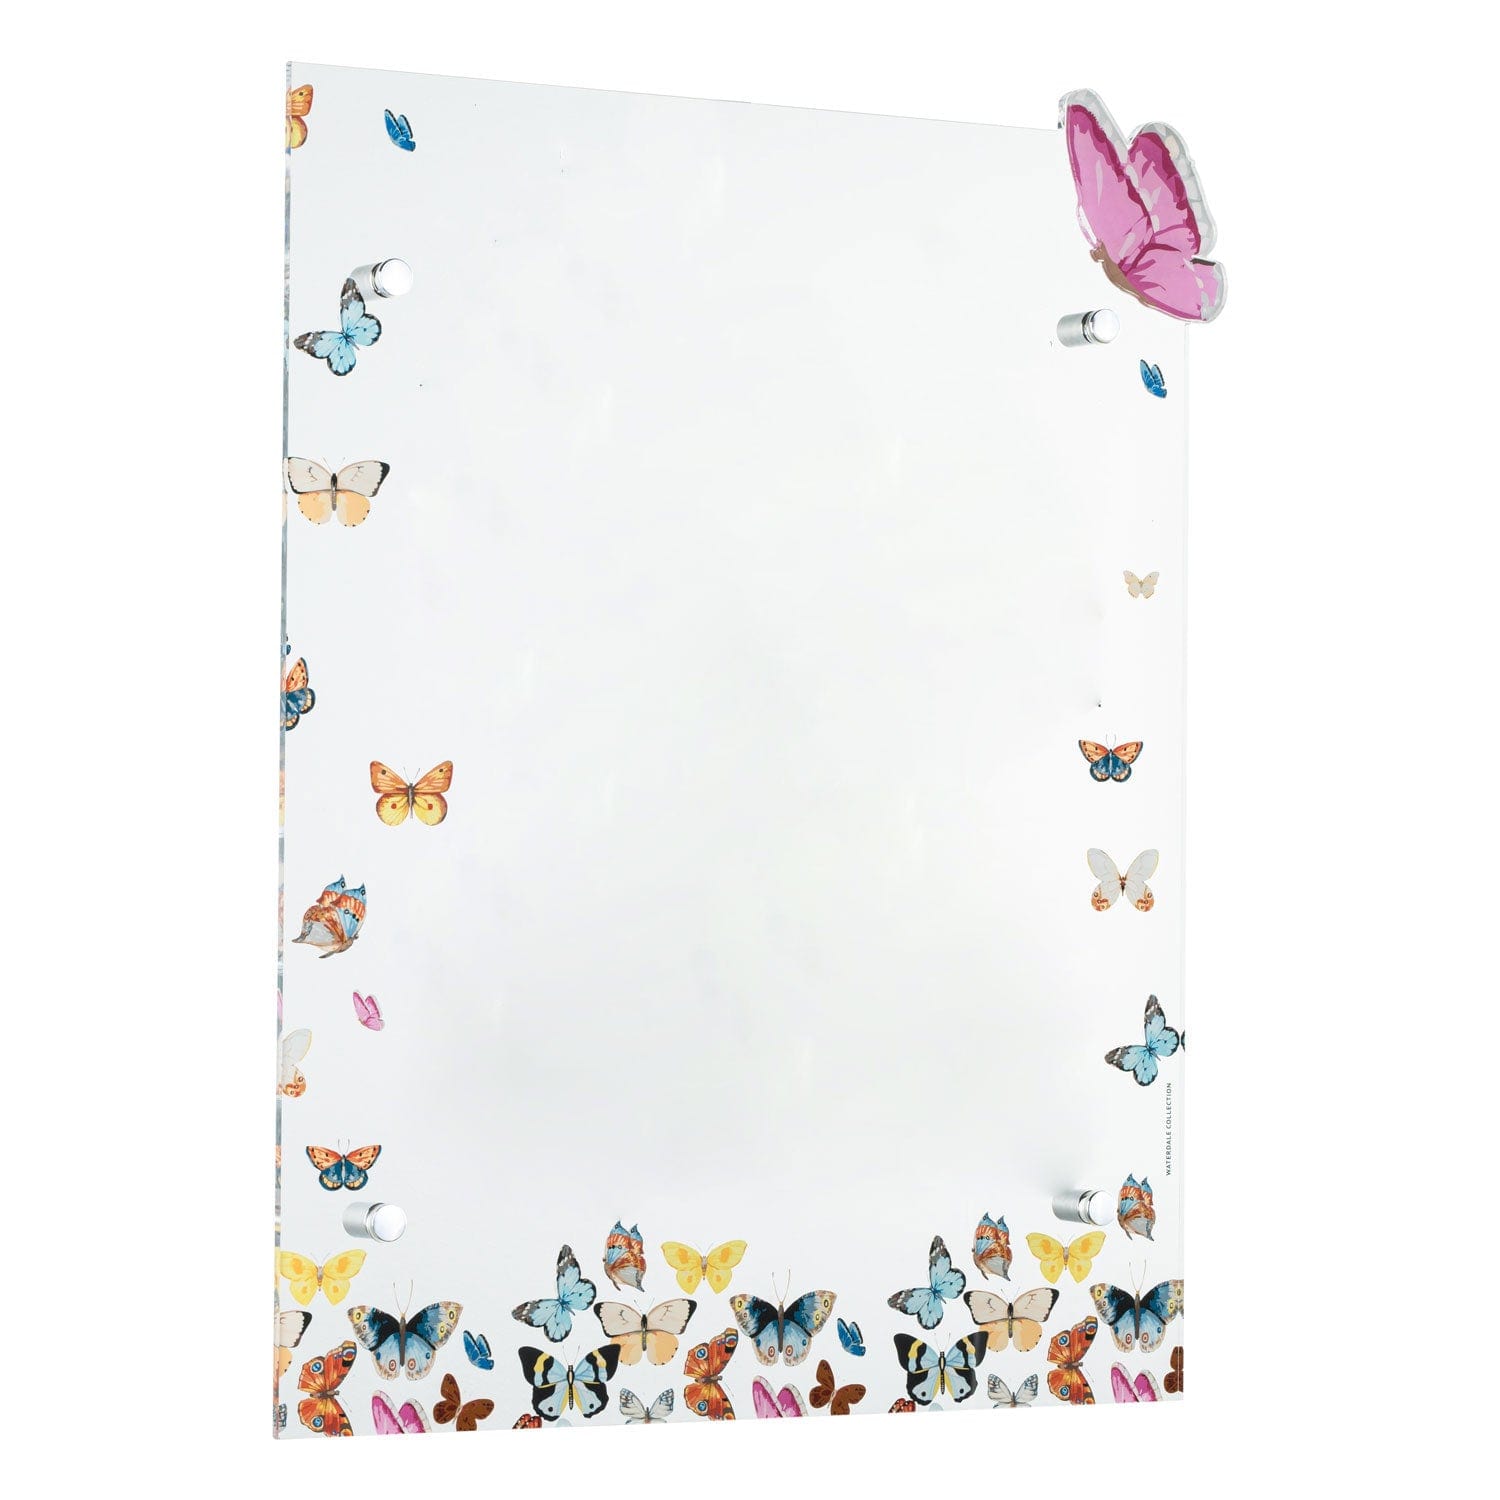 Butterfly Custom Print Wall Art - Waterdale Collection